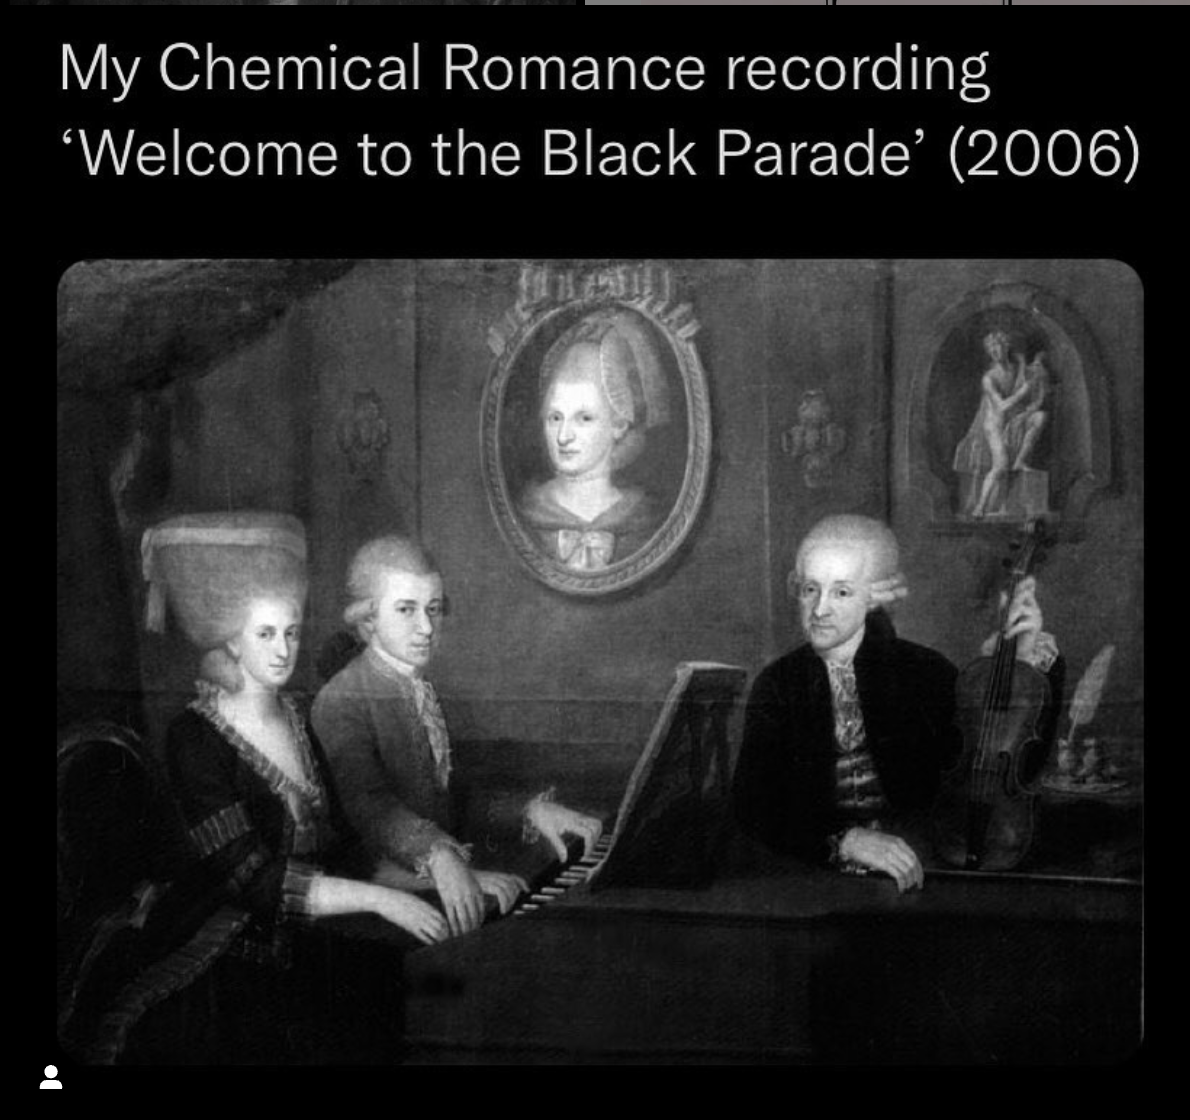 mozart family portrait - My Chemical Romance recording Welcome to the Black Parade' 2006